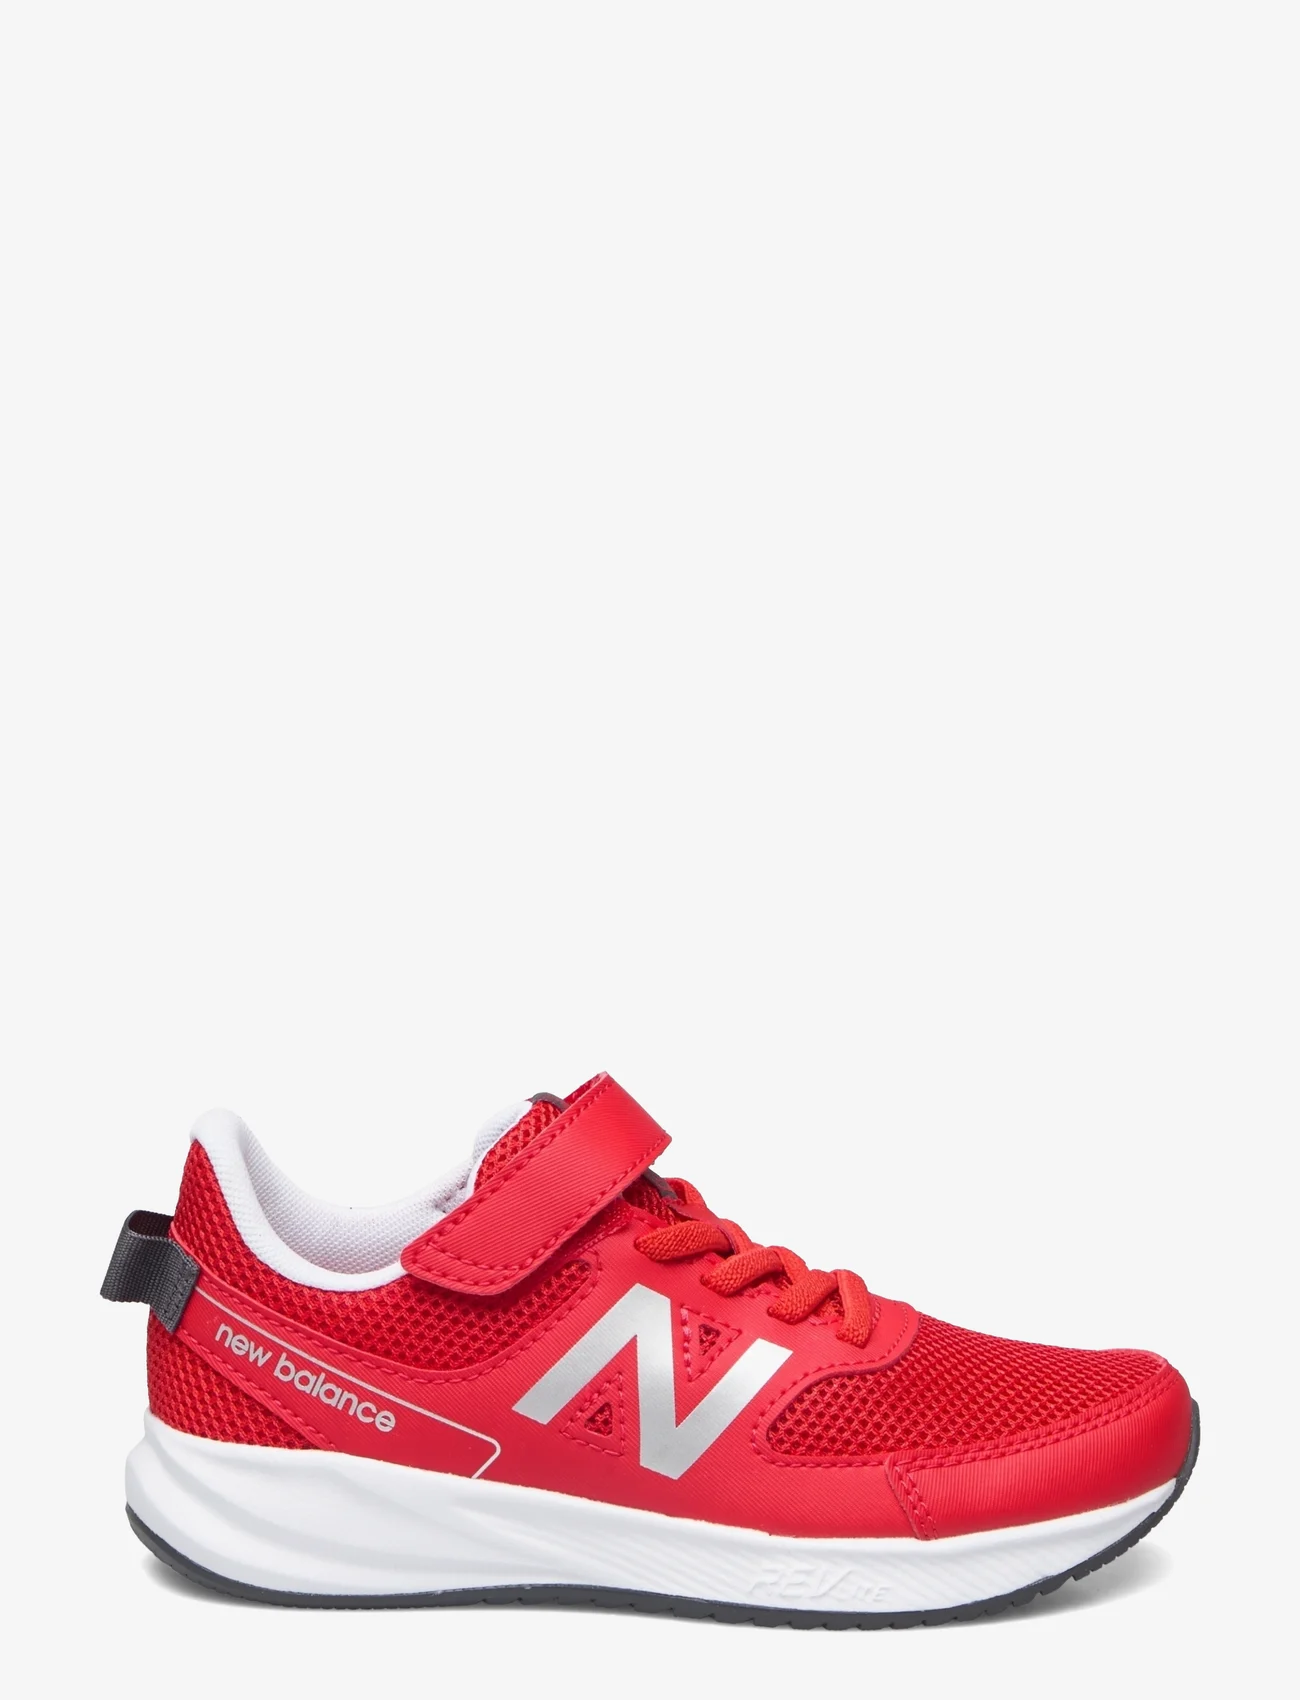 New Balance - New Balance 570 v3 Kids Bungee Lace with Hook & Loop Top Strap - barn - true red - 1